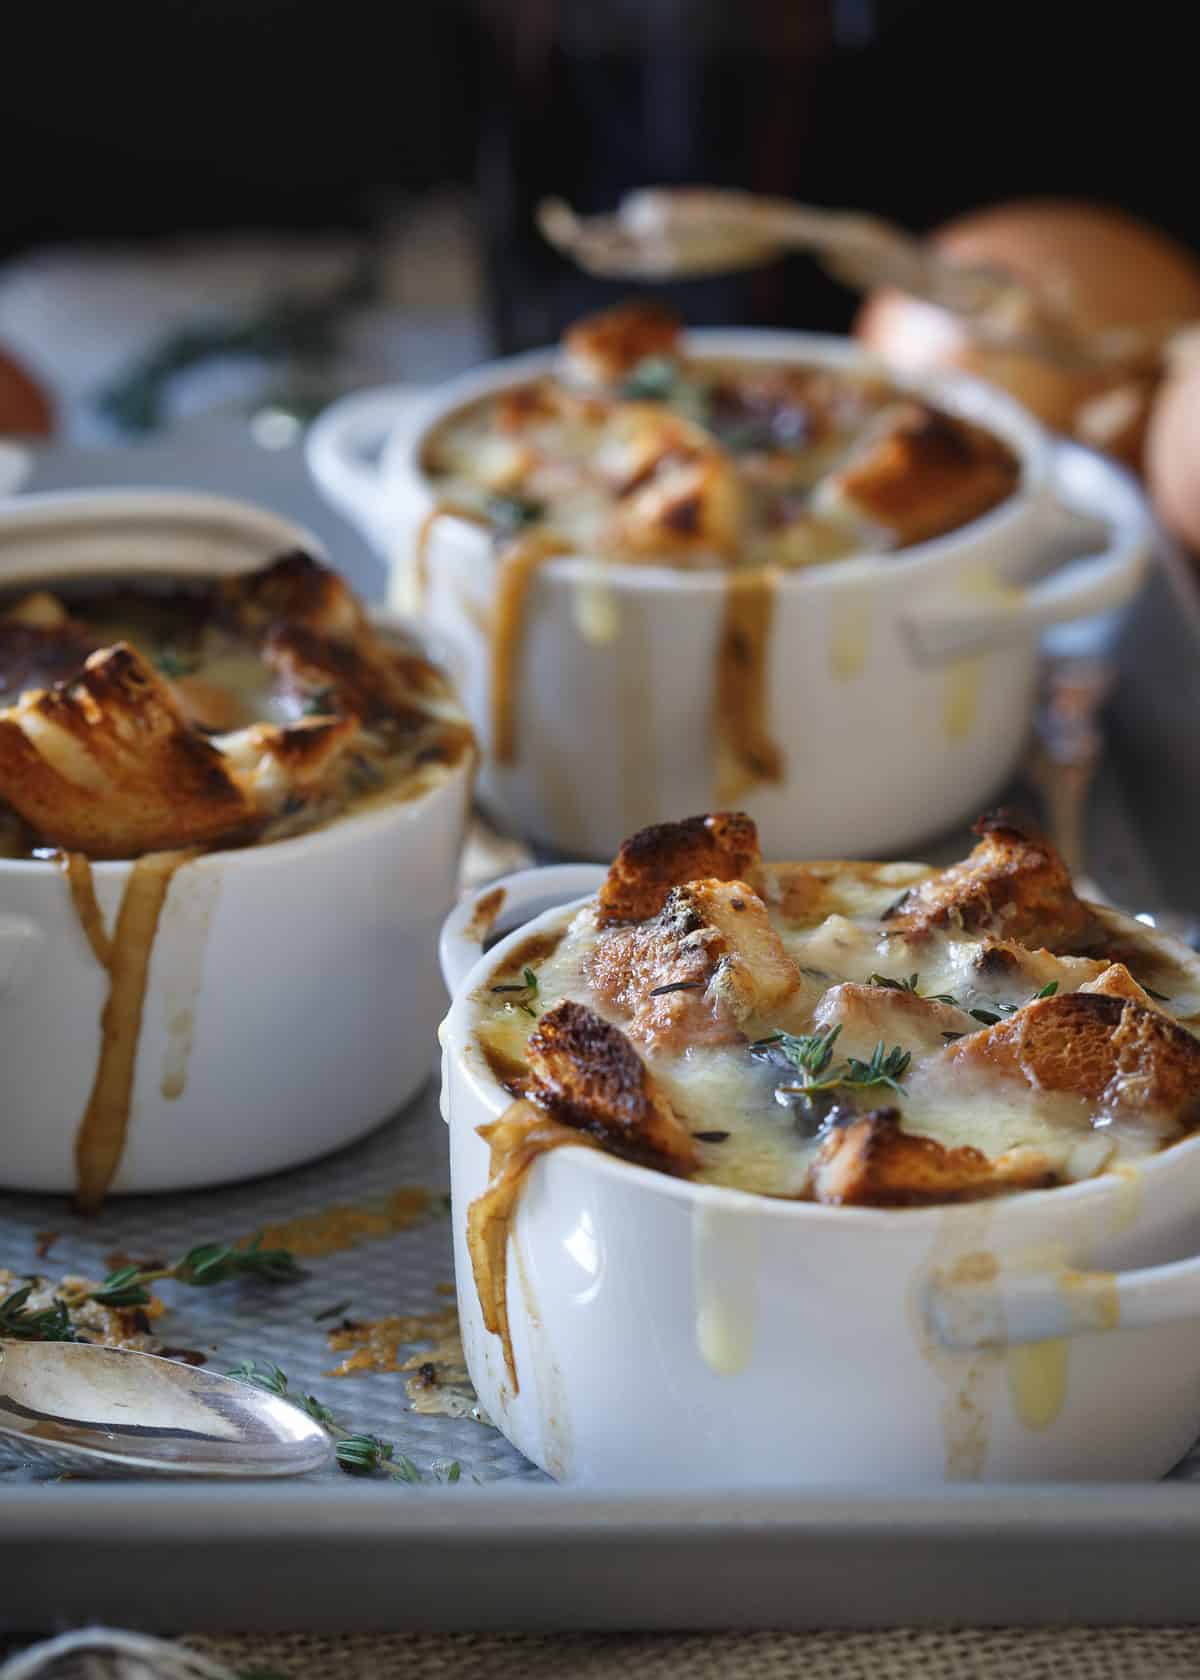 This Irish Stout Onion Soup is a gluten free, cheesy, buttery and hearty meal perfect for celebrating St. Patrick's Day.